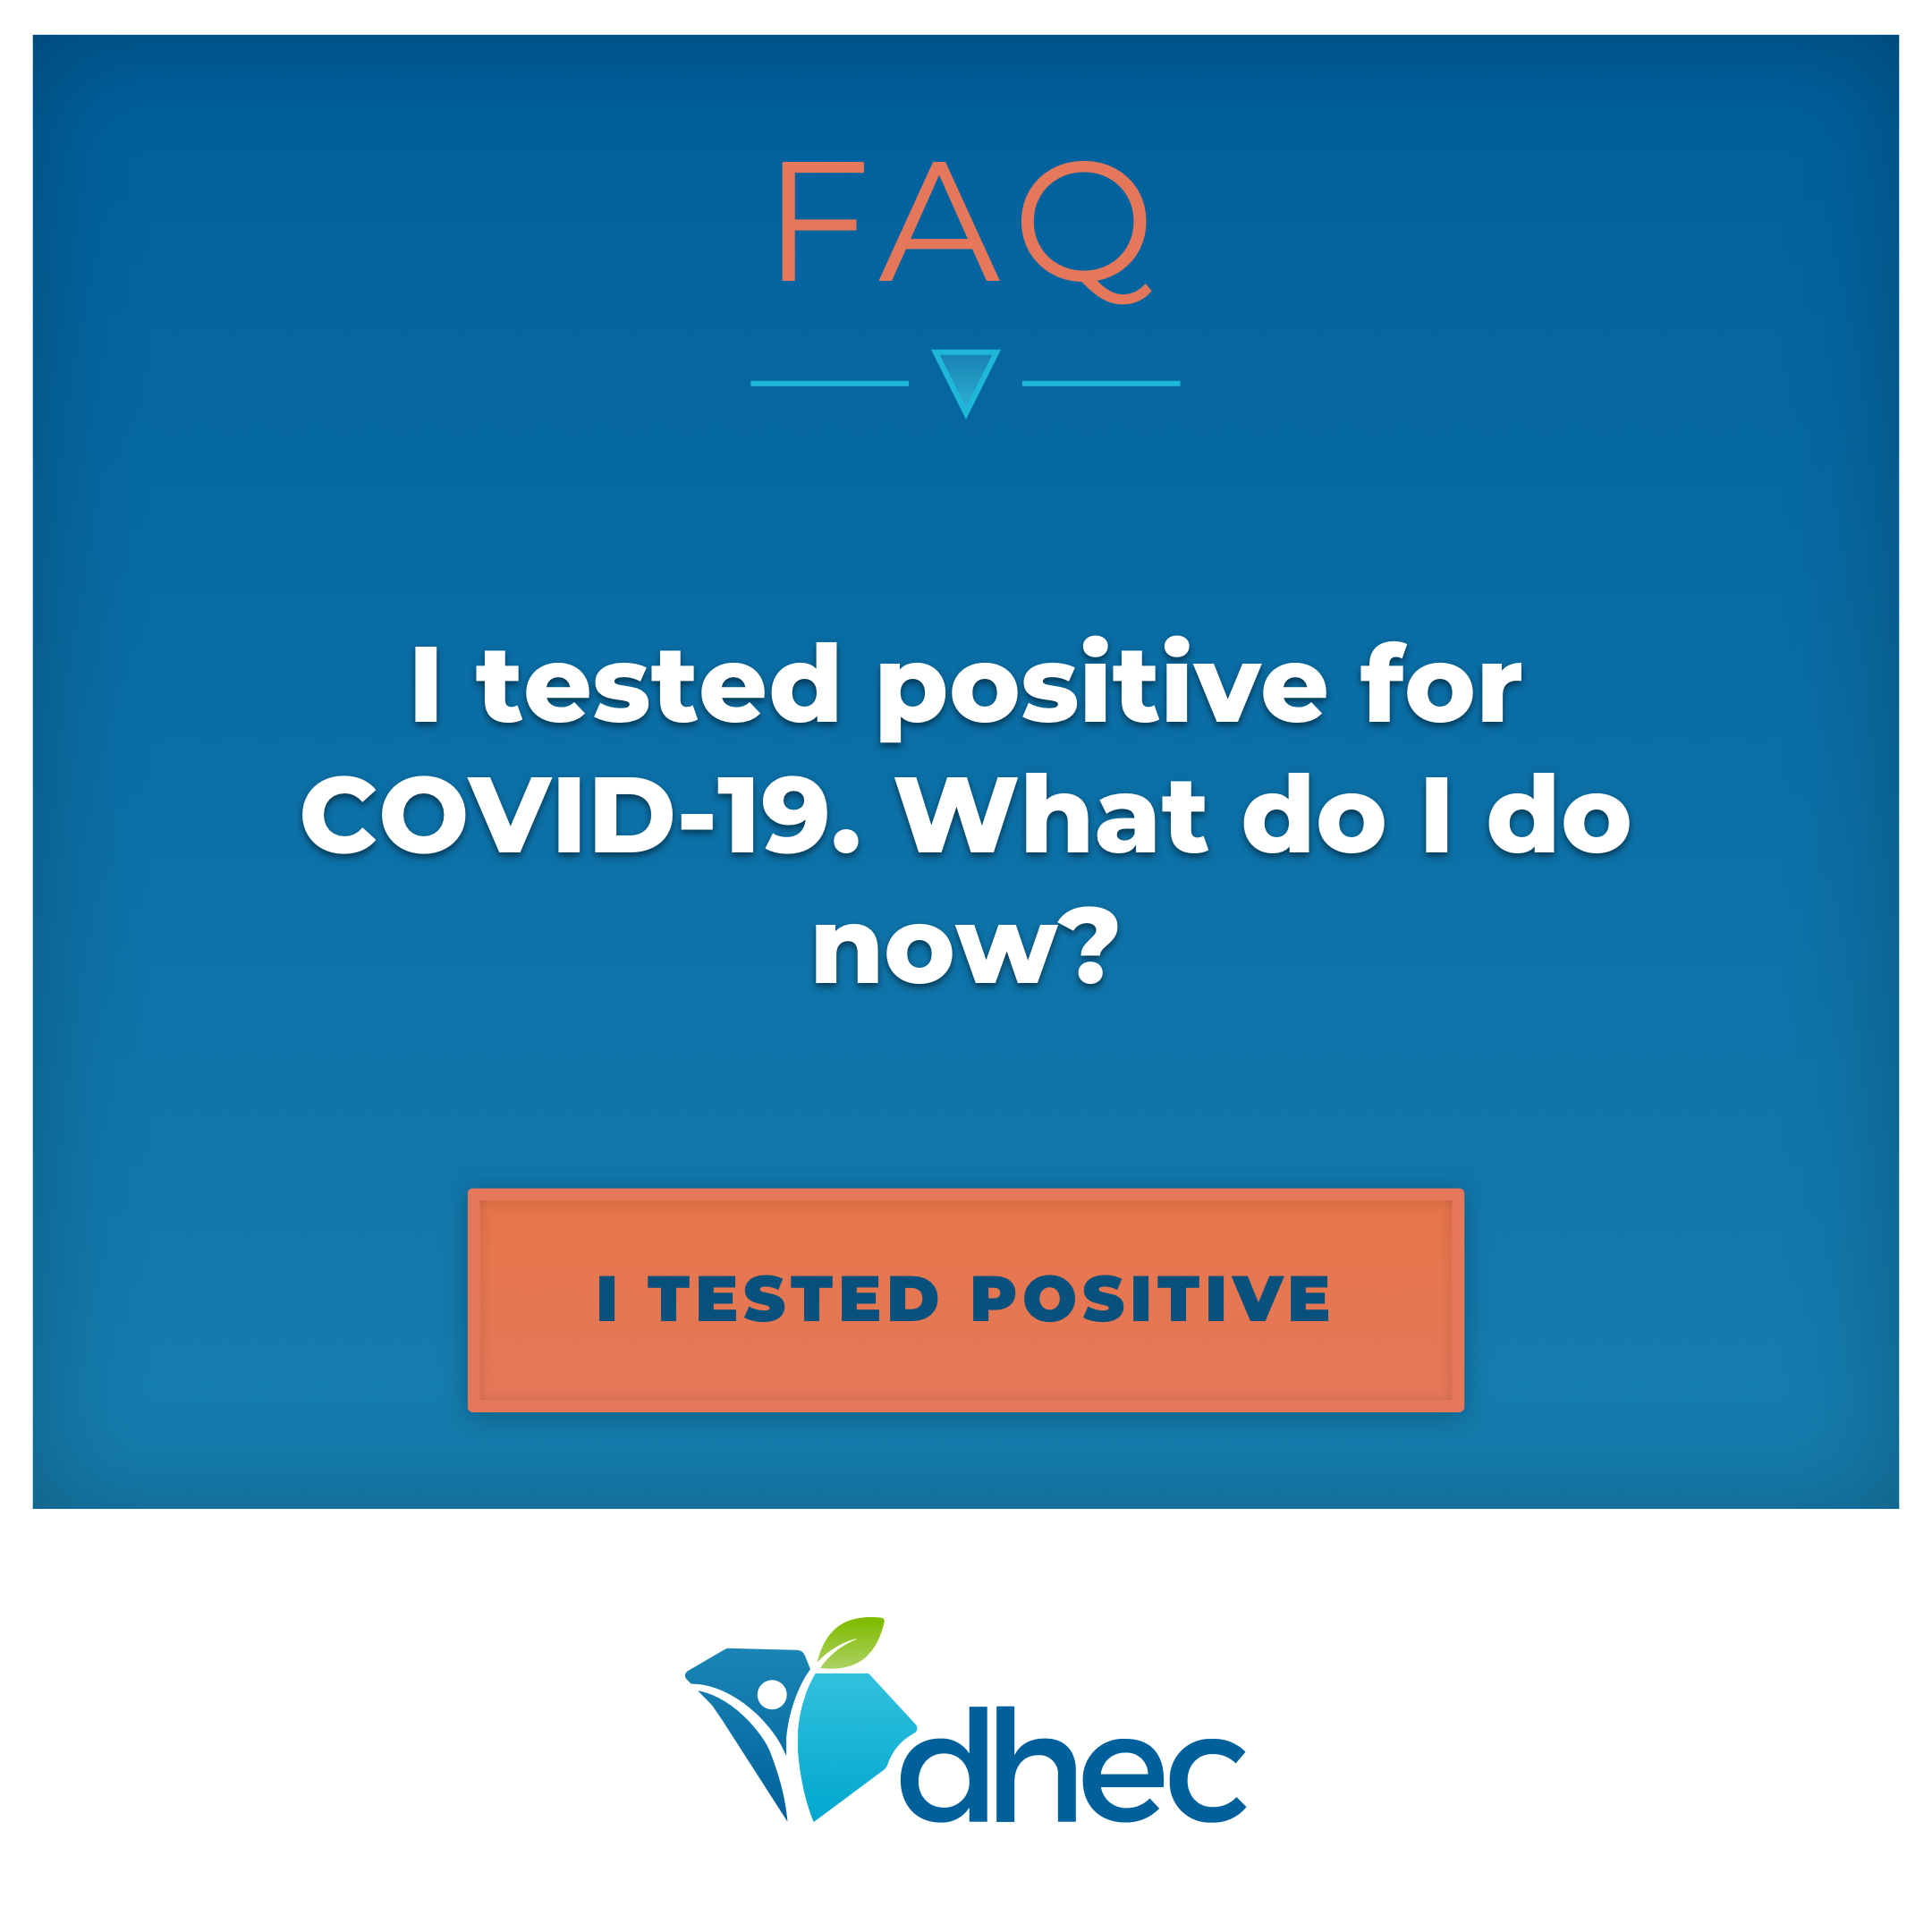 I tested positive for COVID-19. What do I do now?